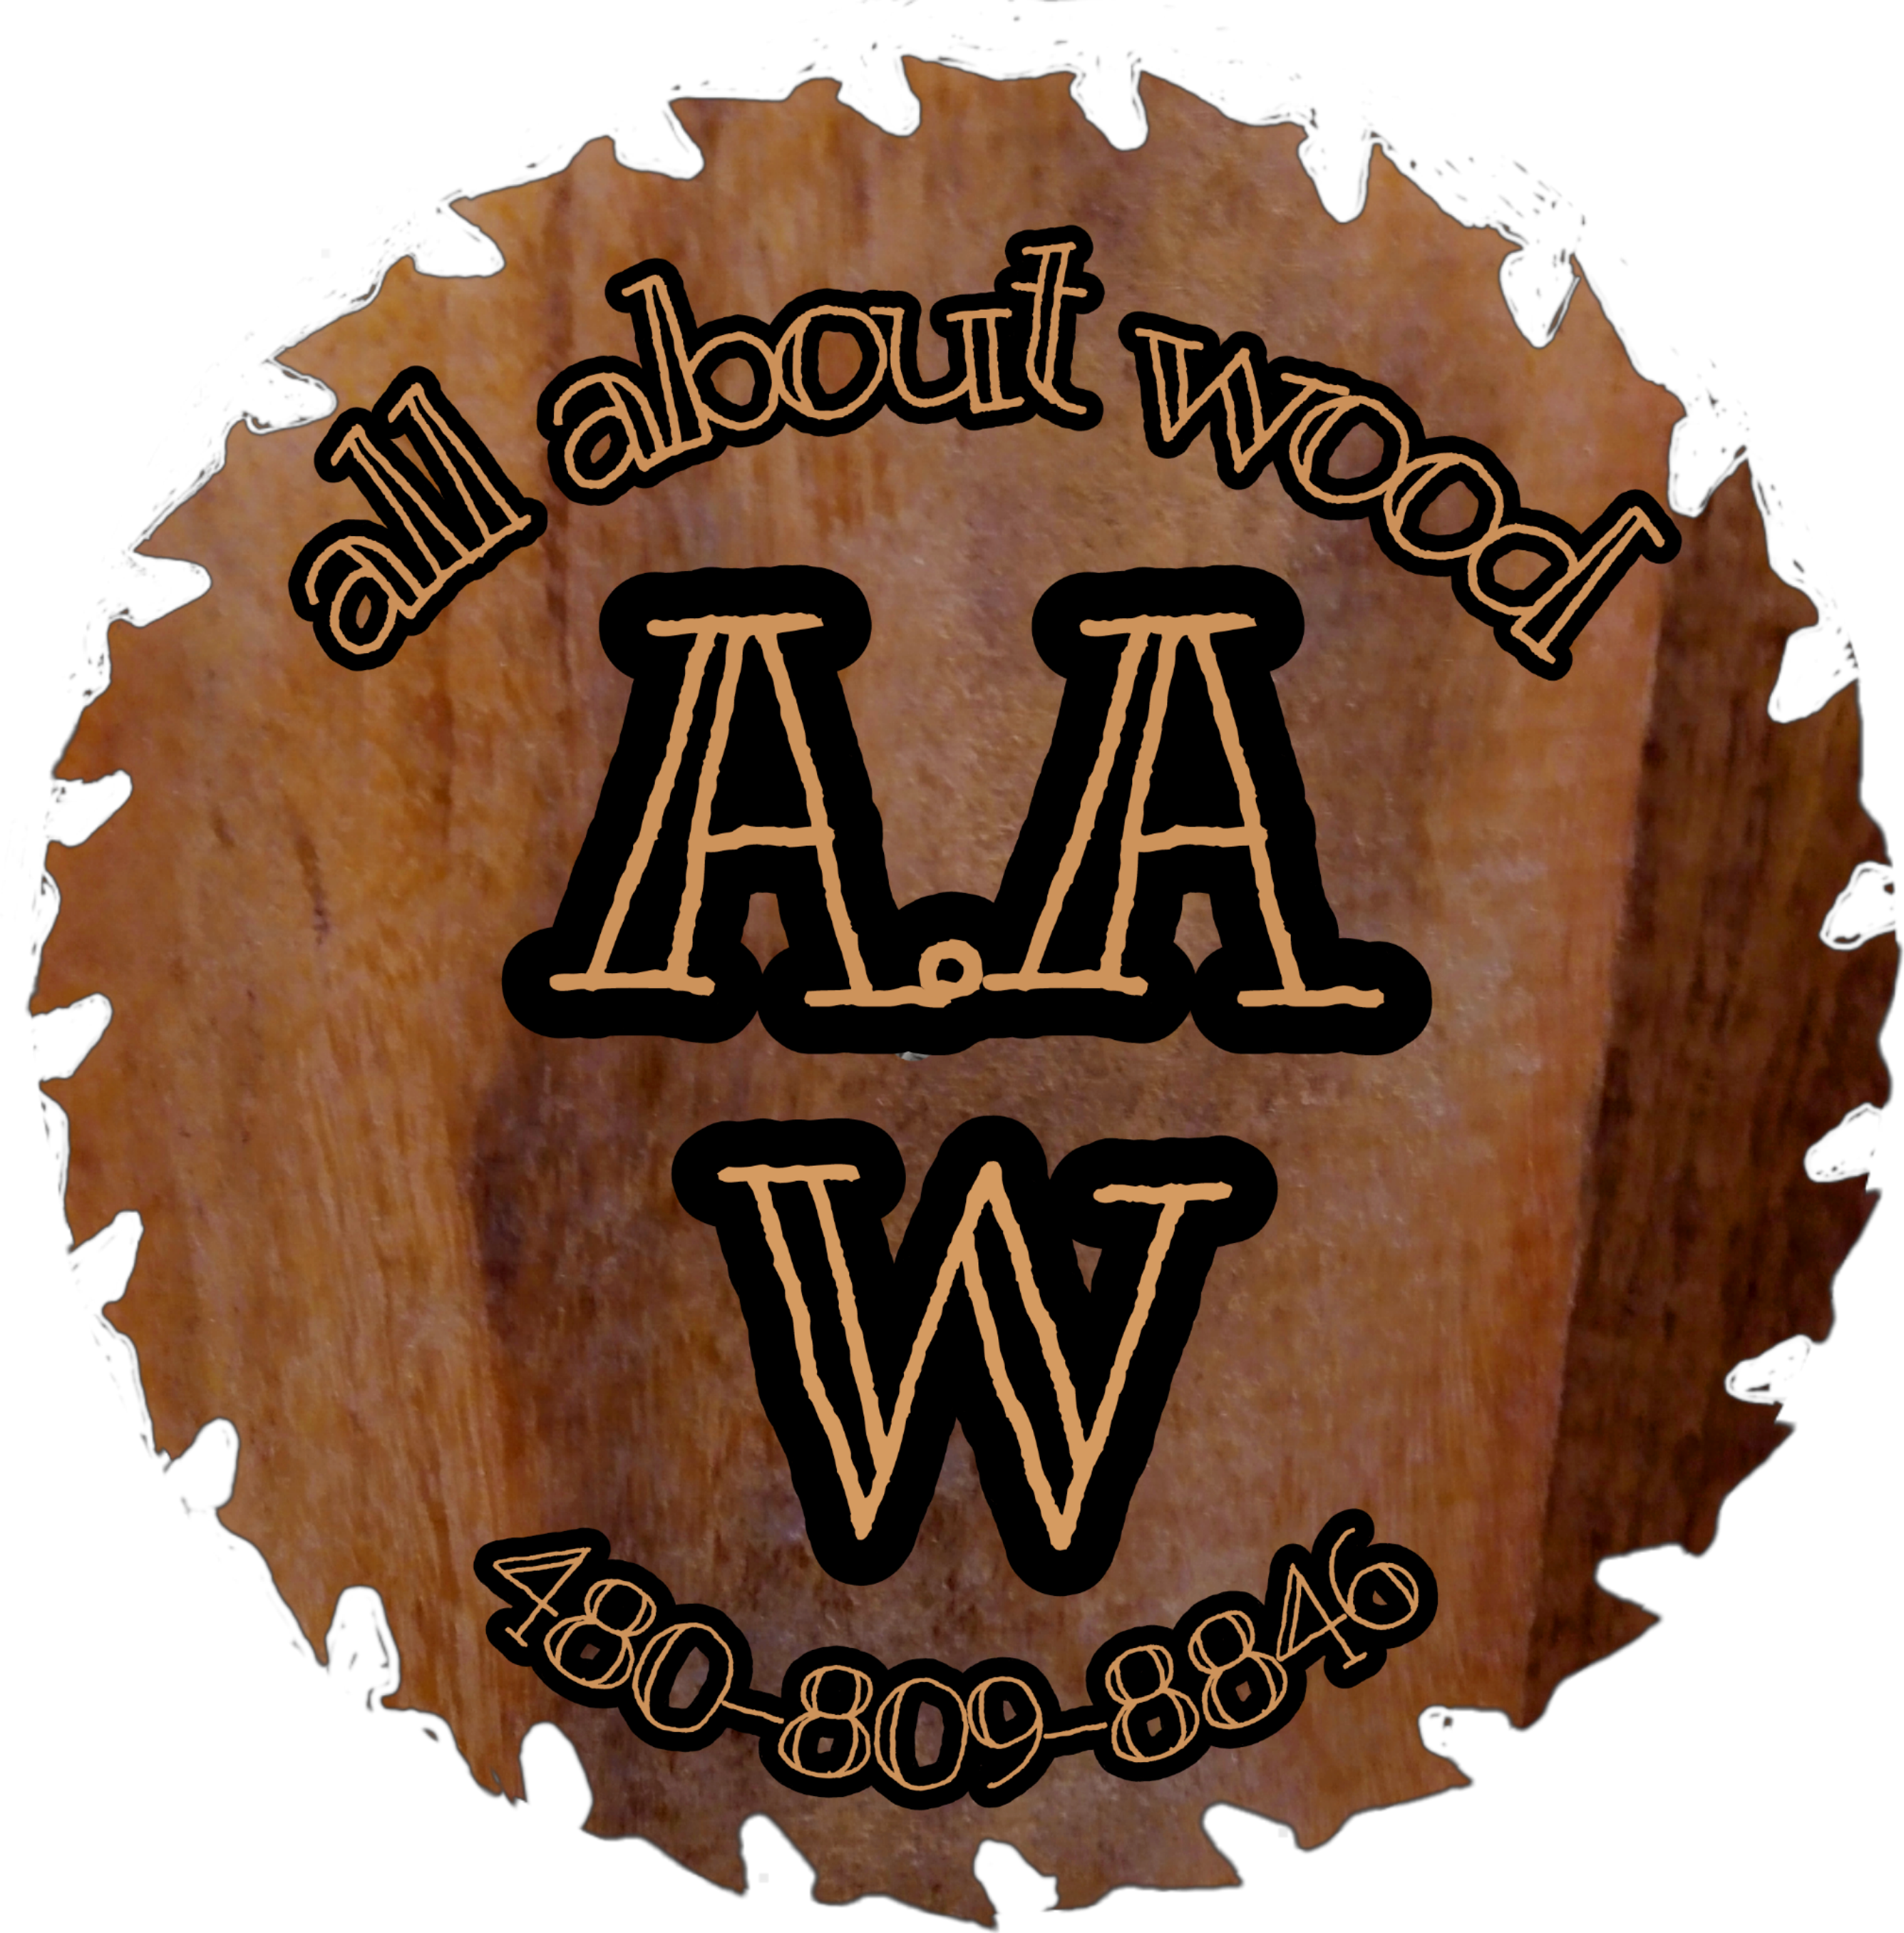 All About Wood Logo